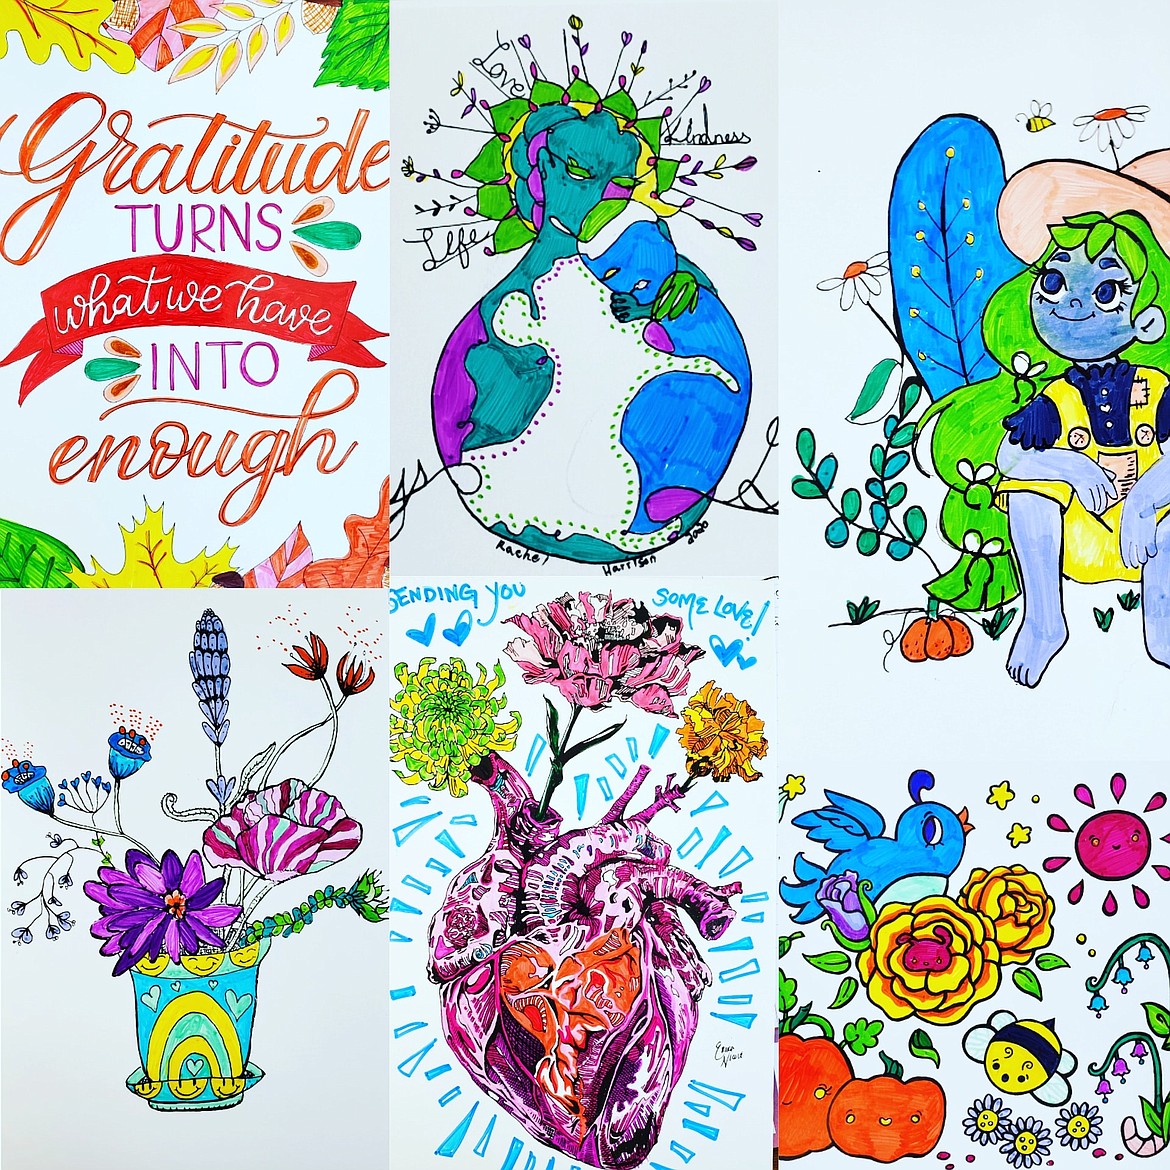 The seven artists who worked on Project Postcard's designs were given the theme "Gratitude."